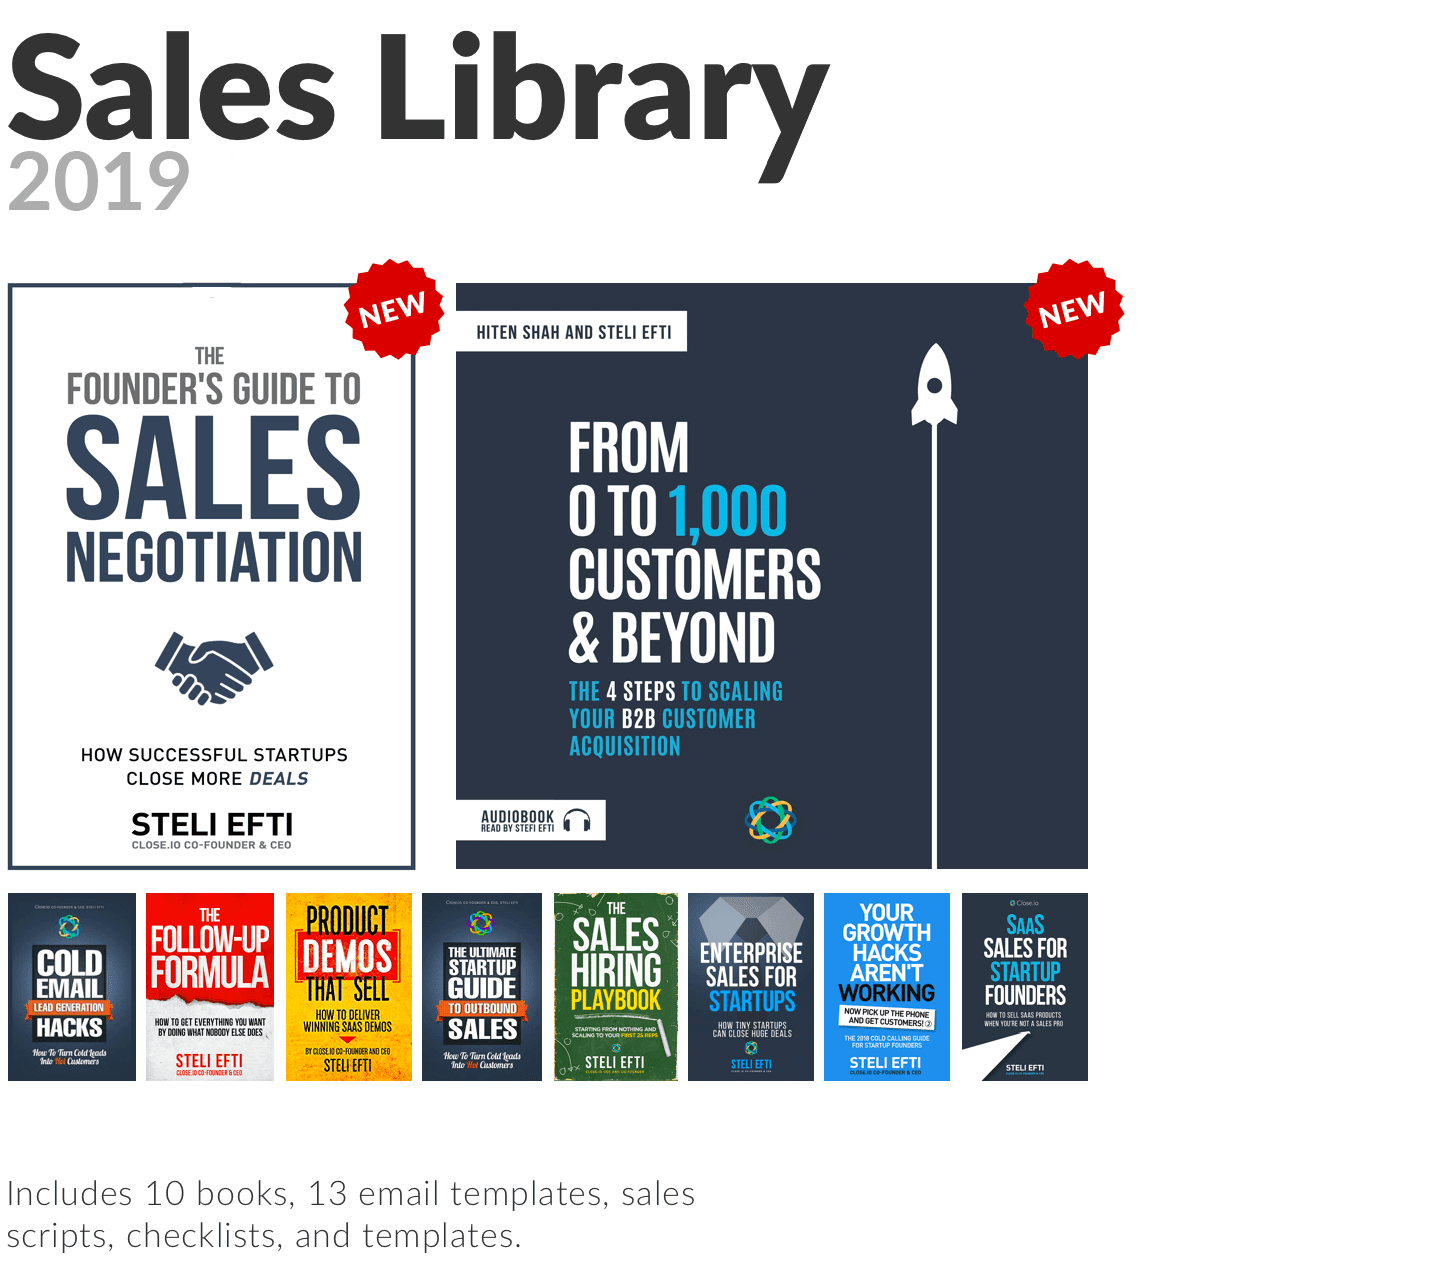 The Sales Library